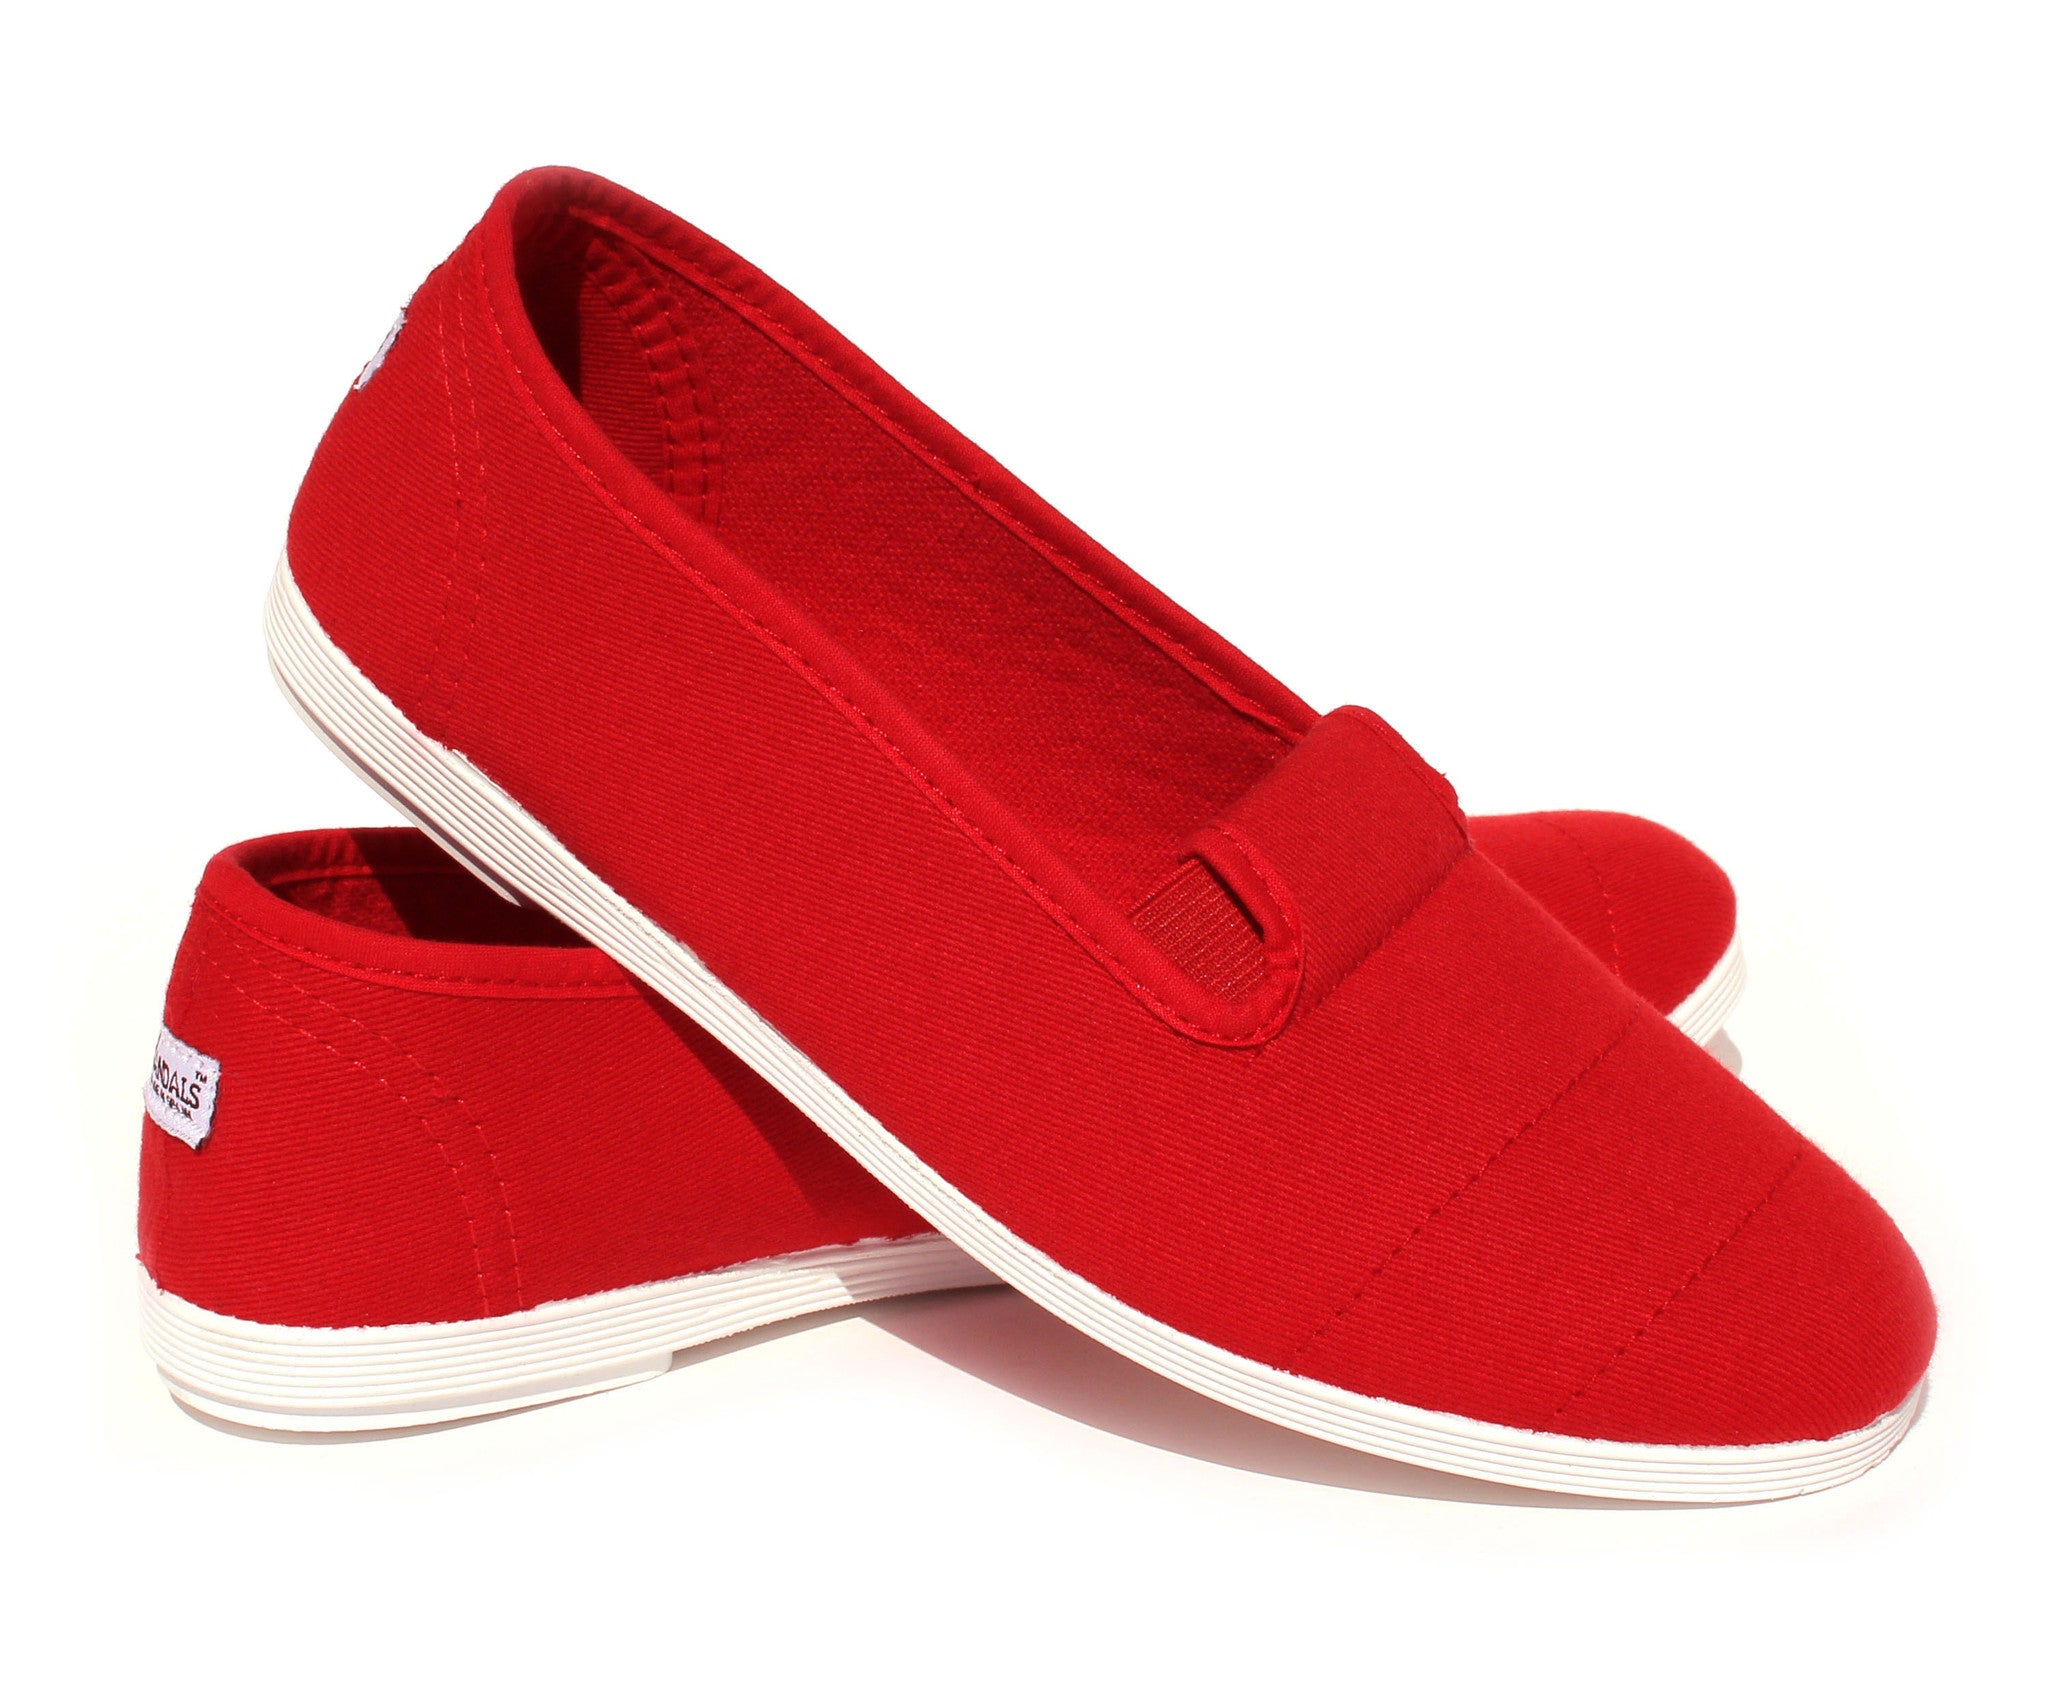 Women's Canvas Shoes - Red | KANDALS 